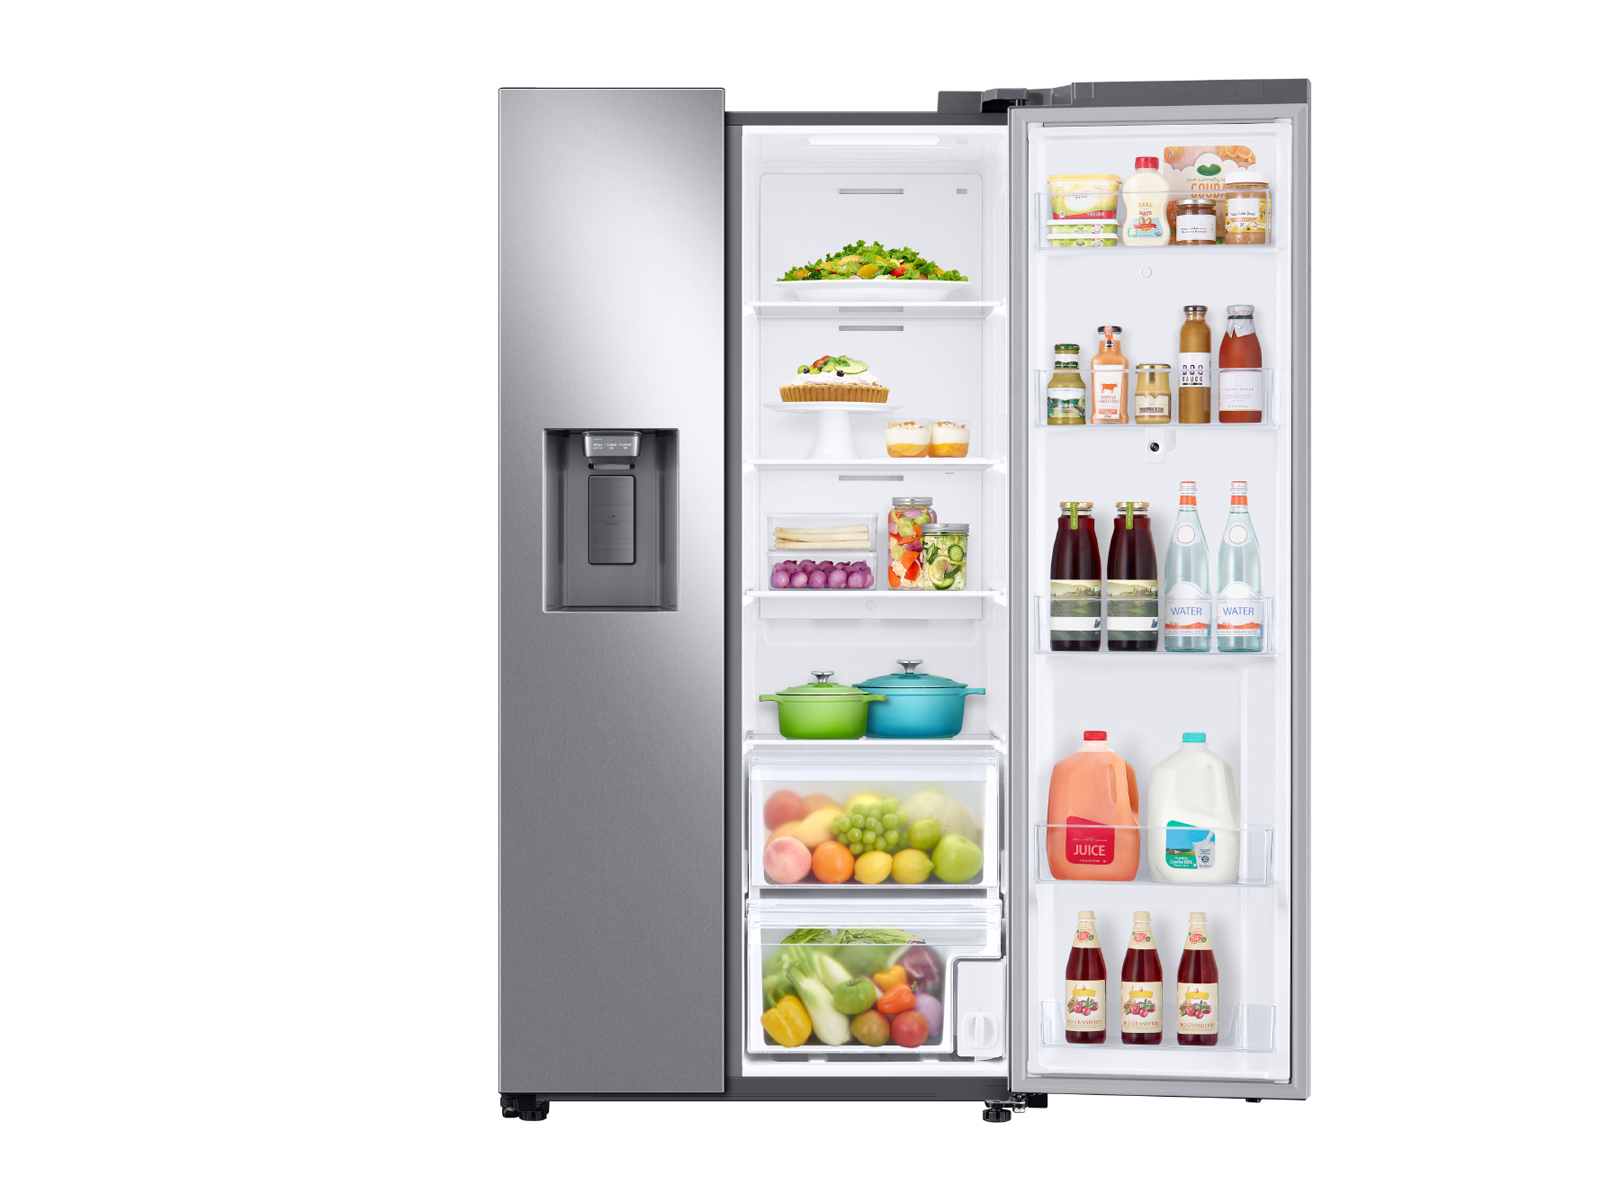 Thumbnail image of 22 cu. ft. Counter Depth Side-by-Side Refrigerator with Touch Screen Family Hub&trade; in Stainless Steel